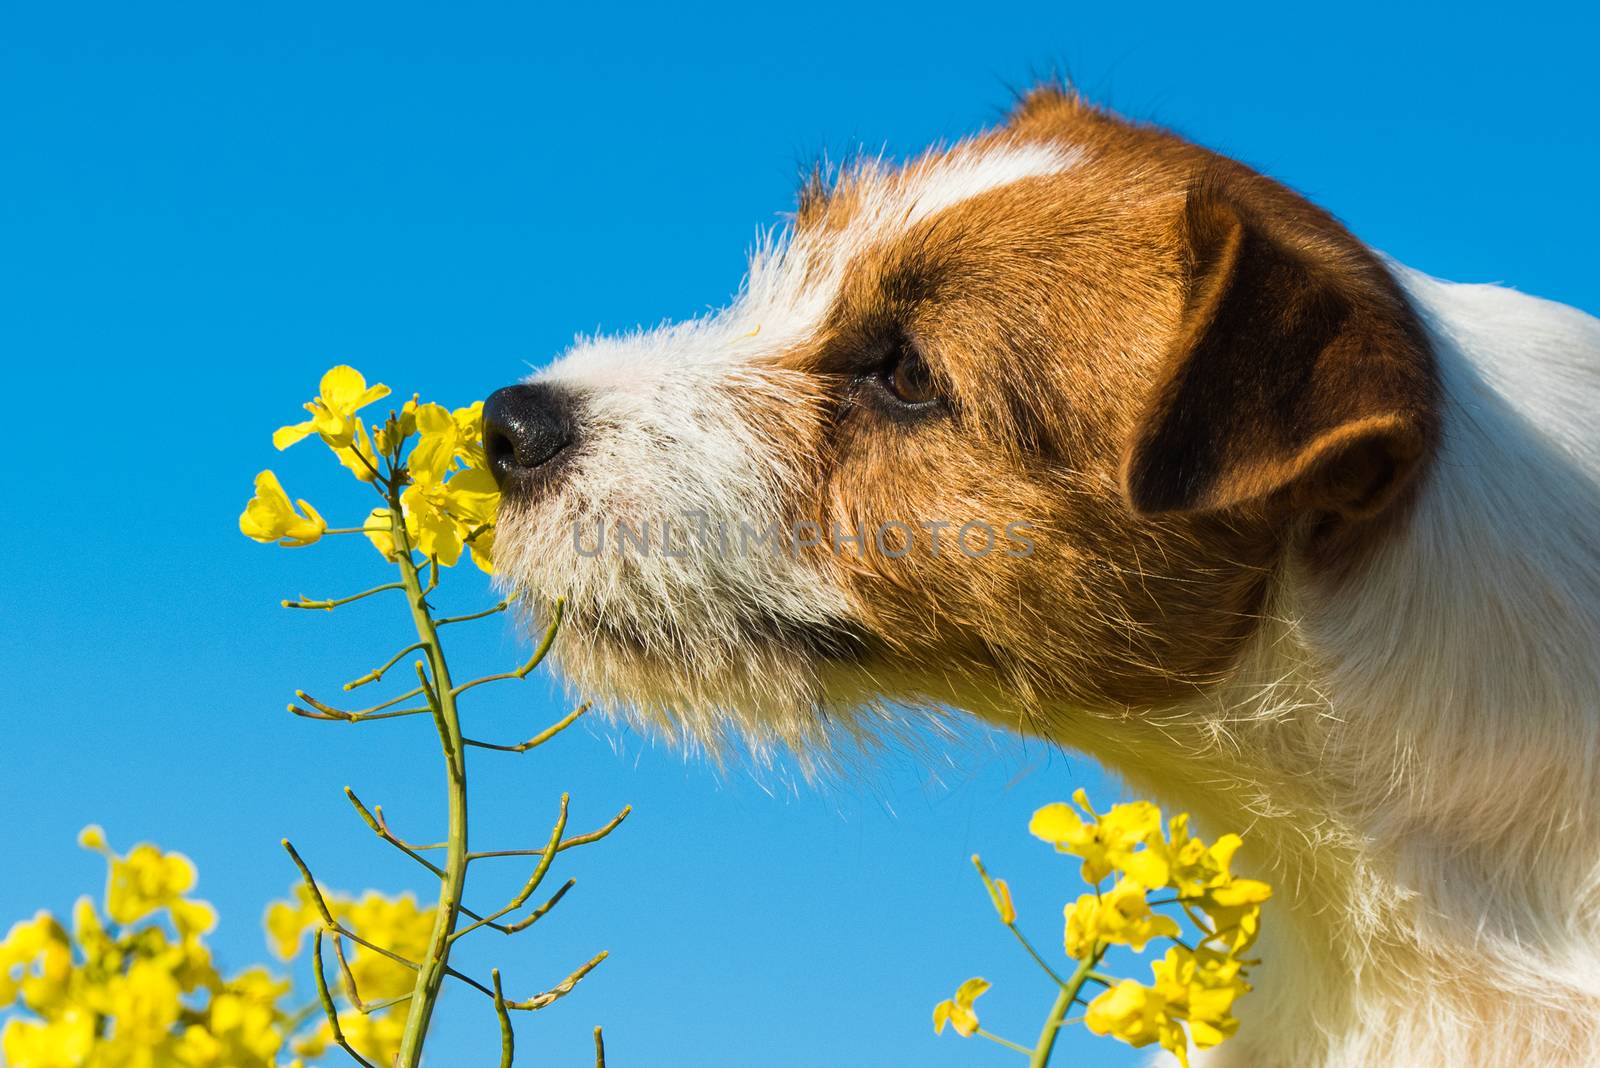 jack russell dog sniffing yellow wraps flowers outside